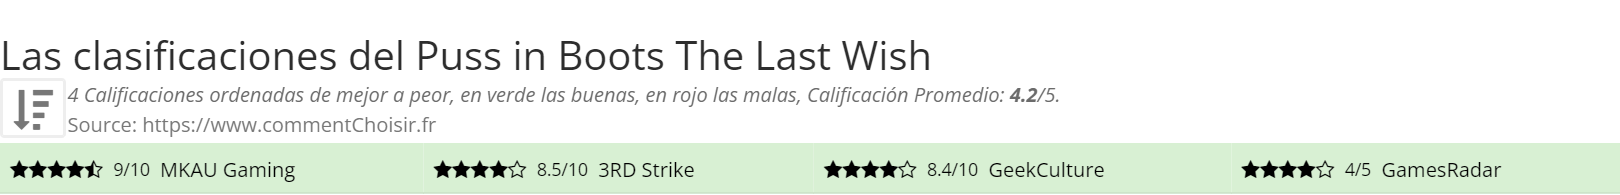 Ratings Puss in Boots The Last Wish